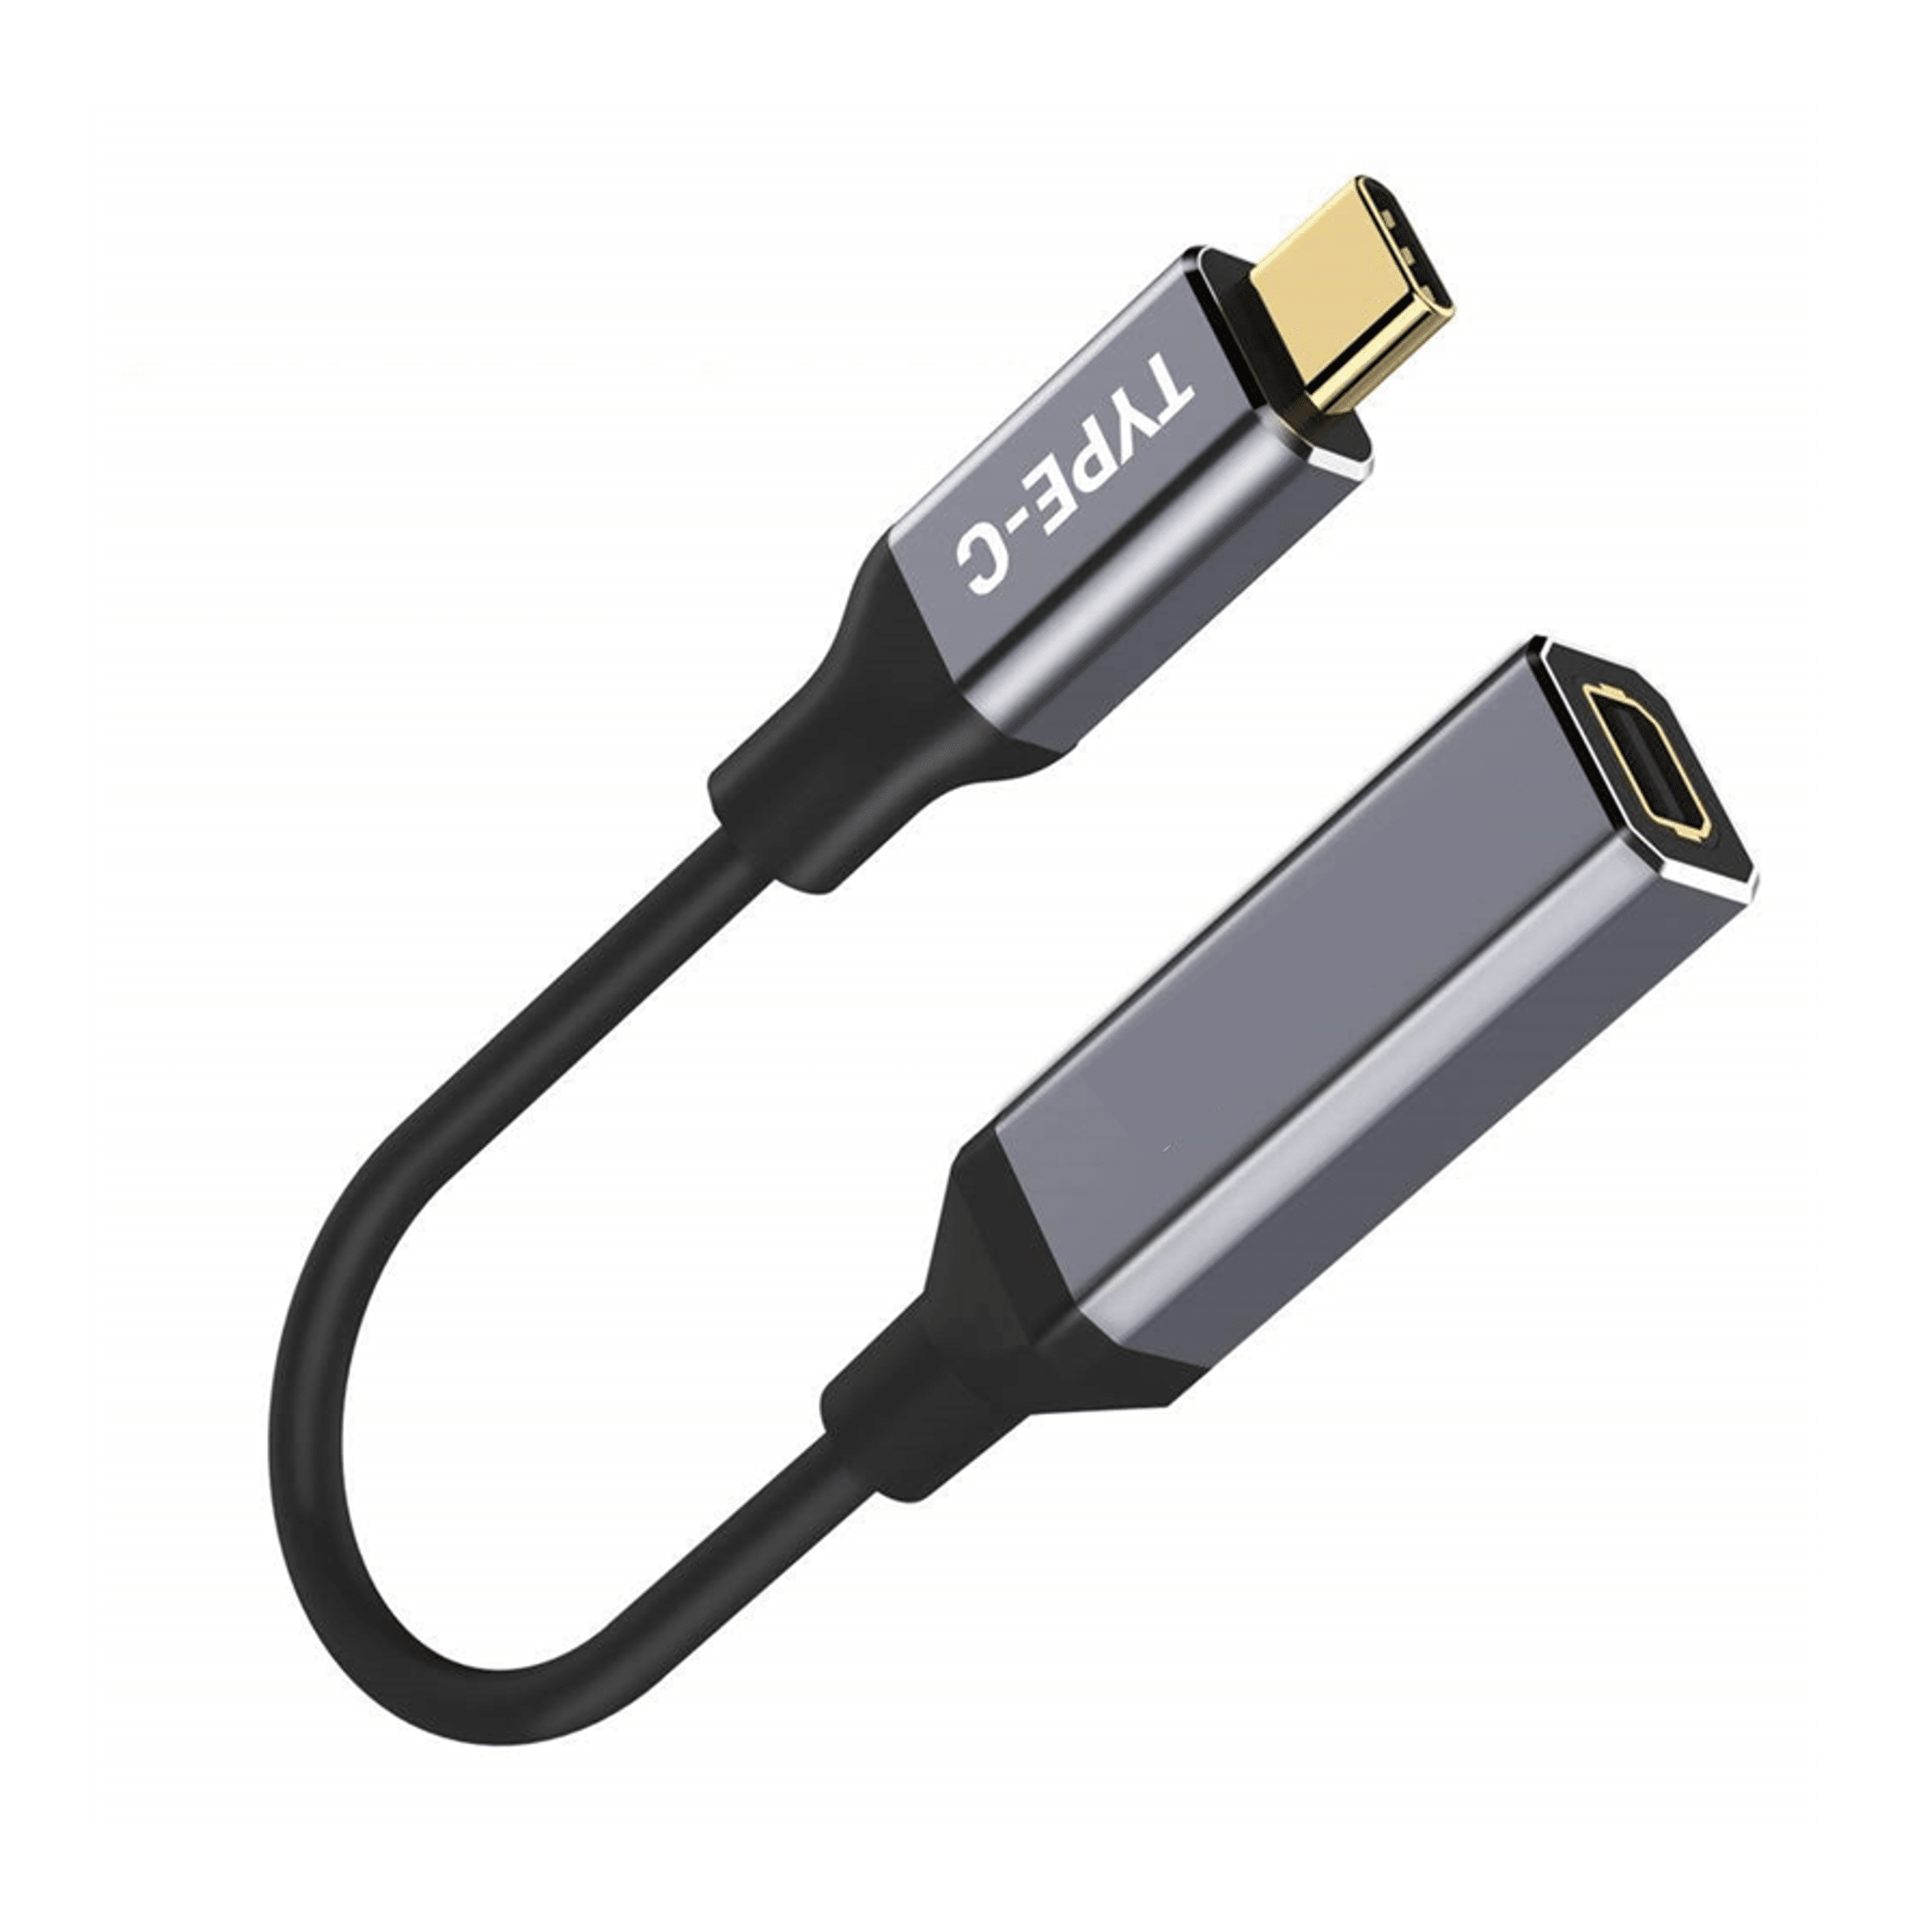 Mini DP Extension Cable Aggice 90 Degree Gold Plated M Mini Displayport to F Mini Displayport Adapter 4K Resolution Converter,Thunderbolt to DP Compatible for PC Laptop F Mini DP to M Mini DP up 